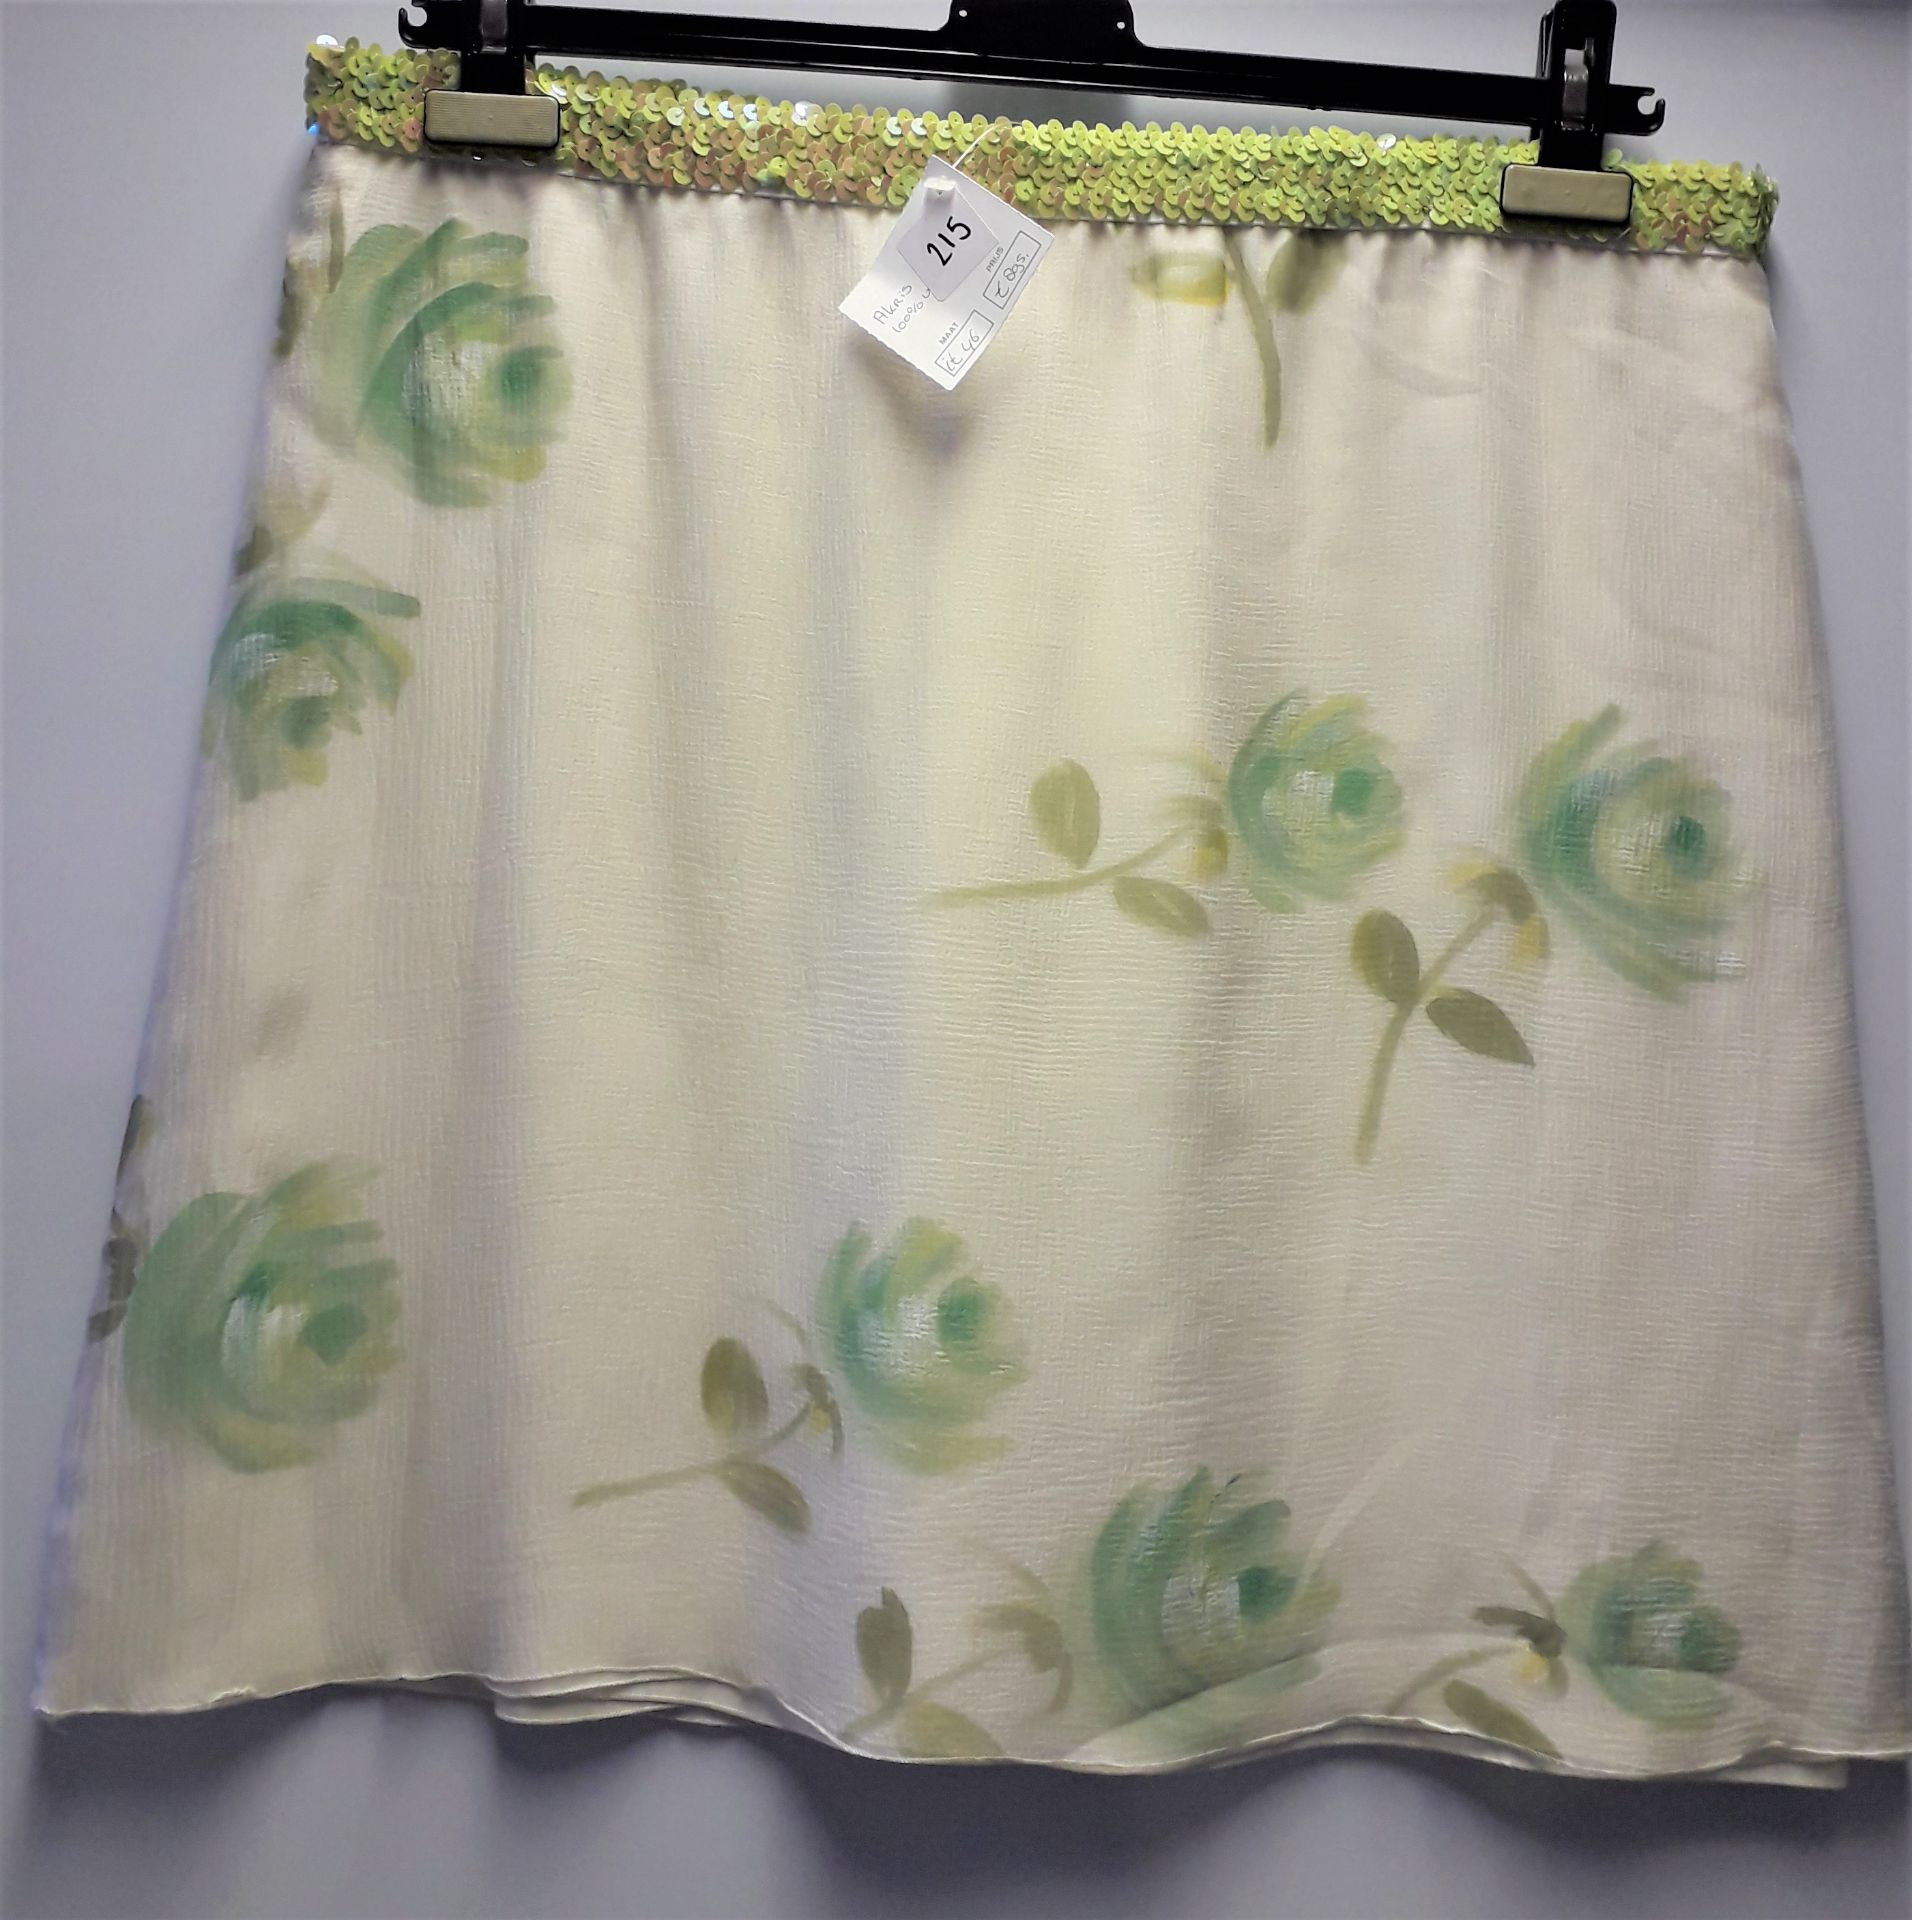 1 x Boutique Le Duc Cream Floral Skirt With Sequin Waistband - Size: 14 - Material: 100% Voilesoie - - Image 5 of 7